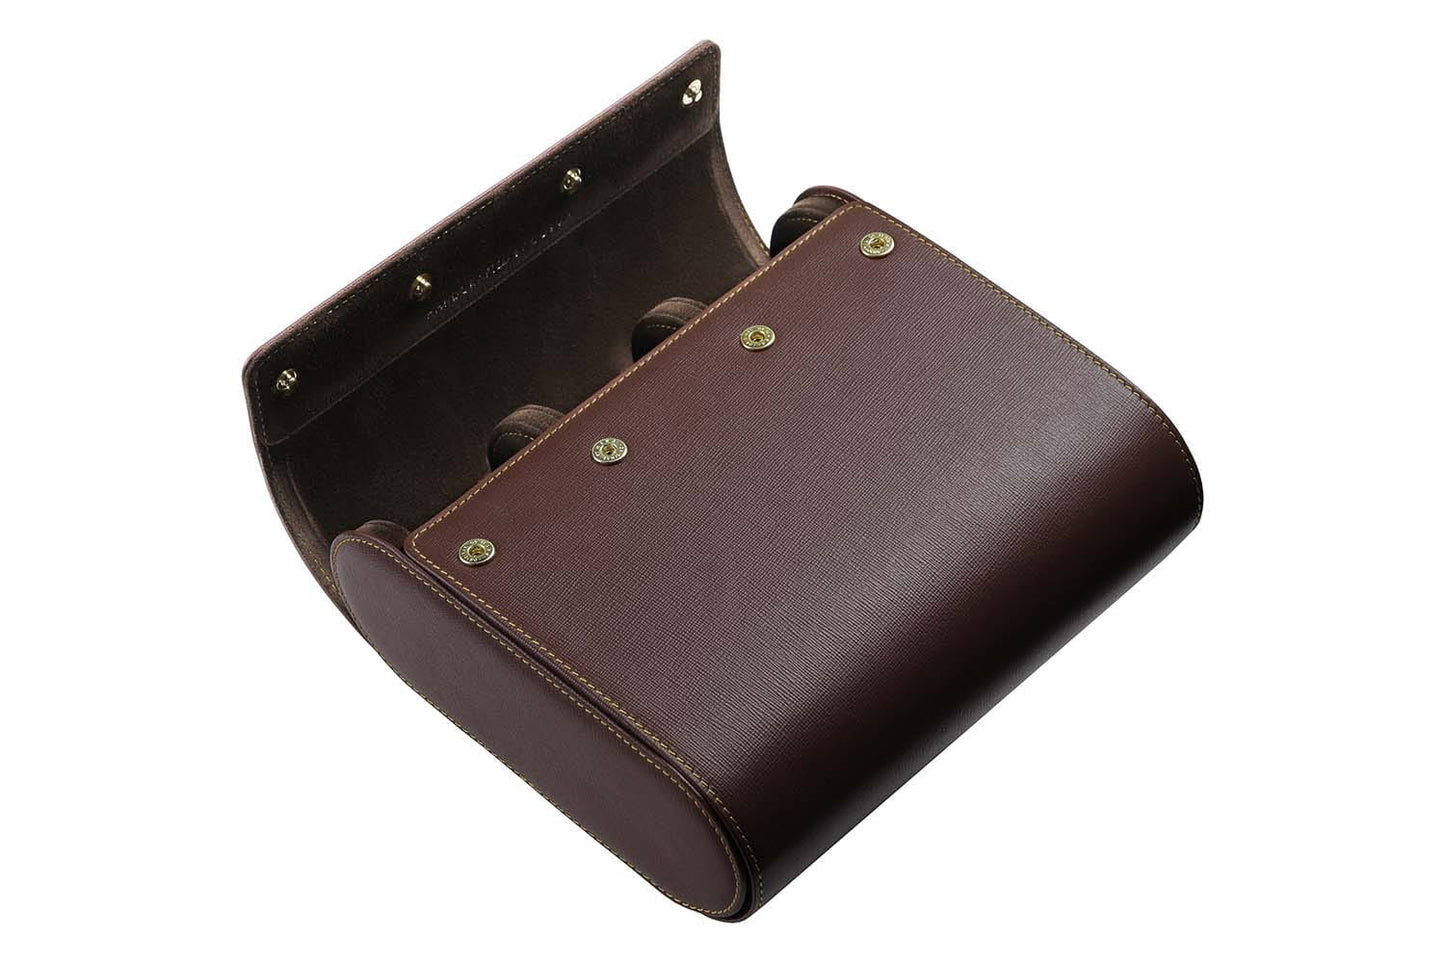 Leather Watch Case for 6 watches - Saffiano Dark Brown / Chocolate